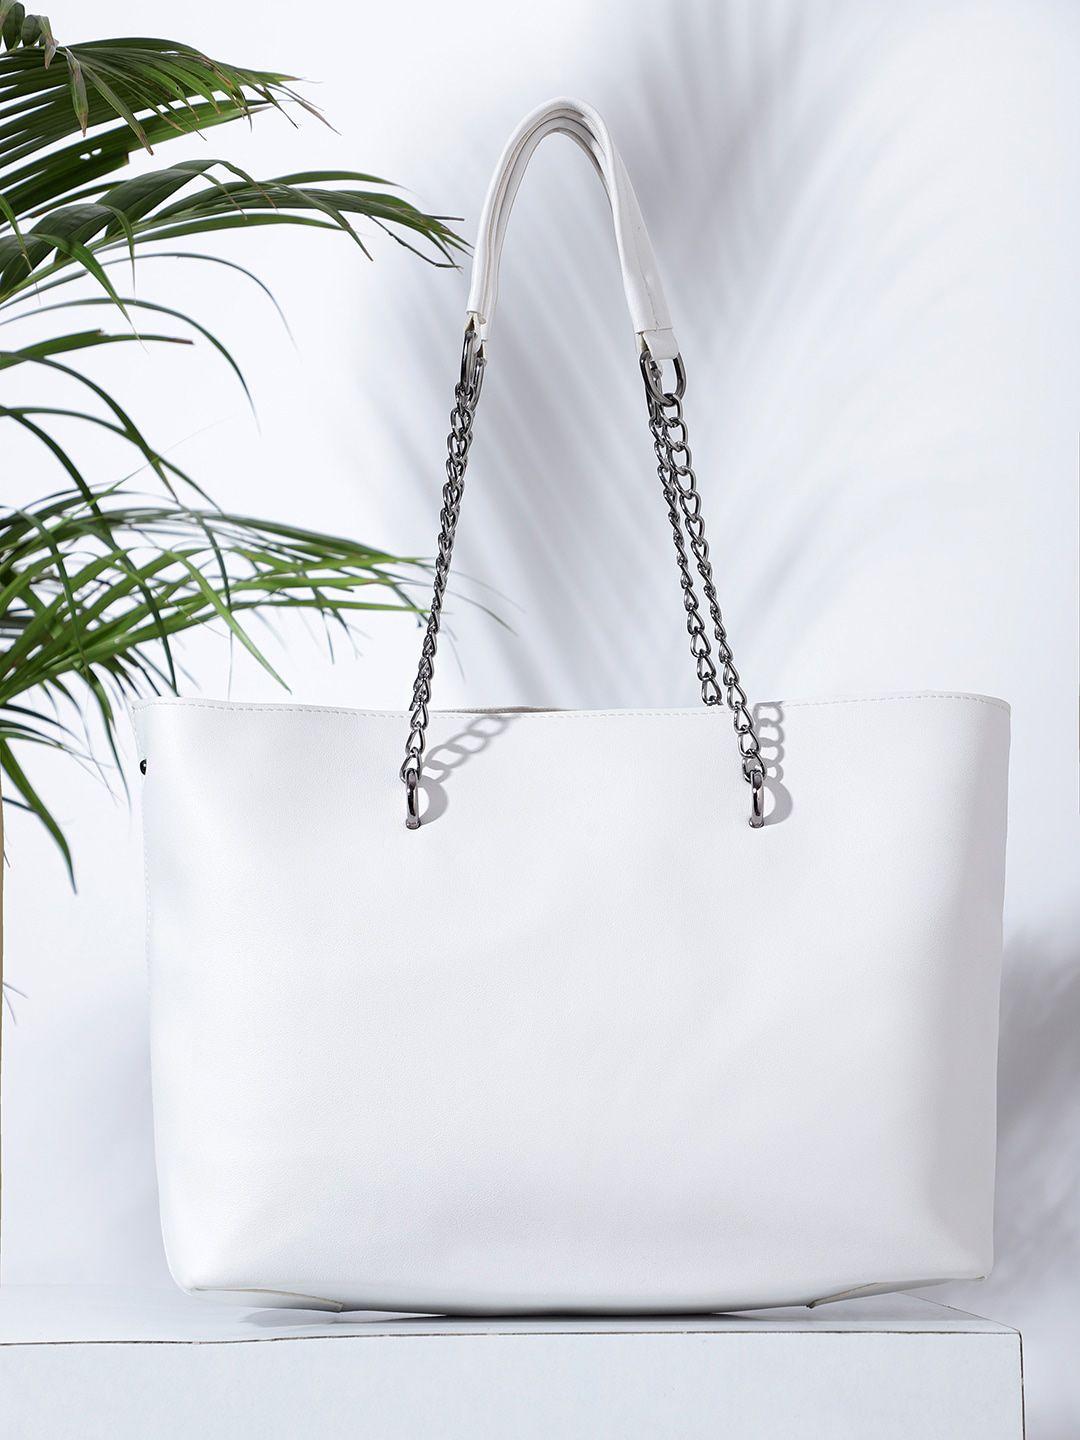 bag pepper white pu oversized structured tote bag